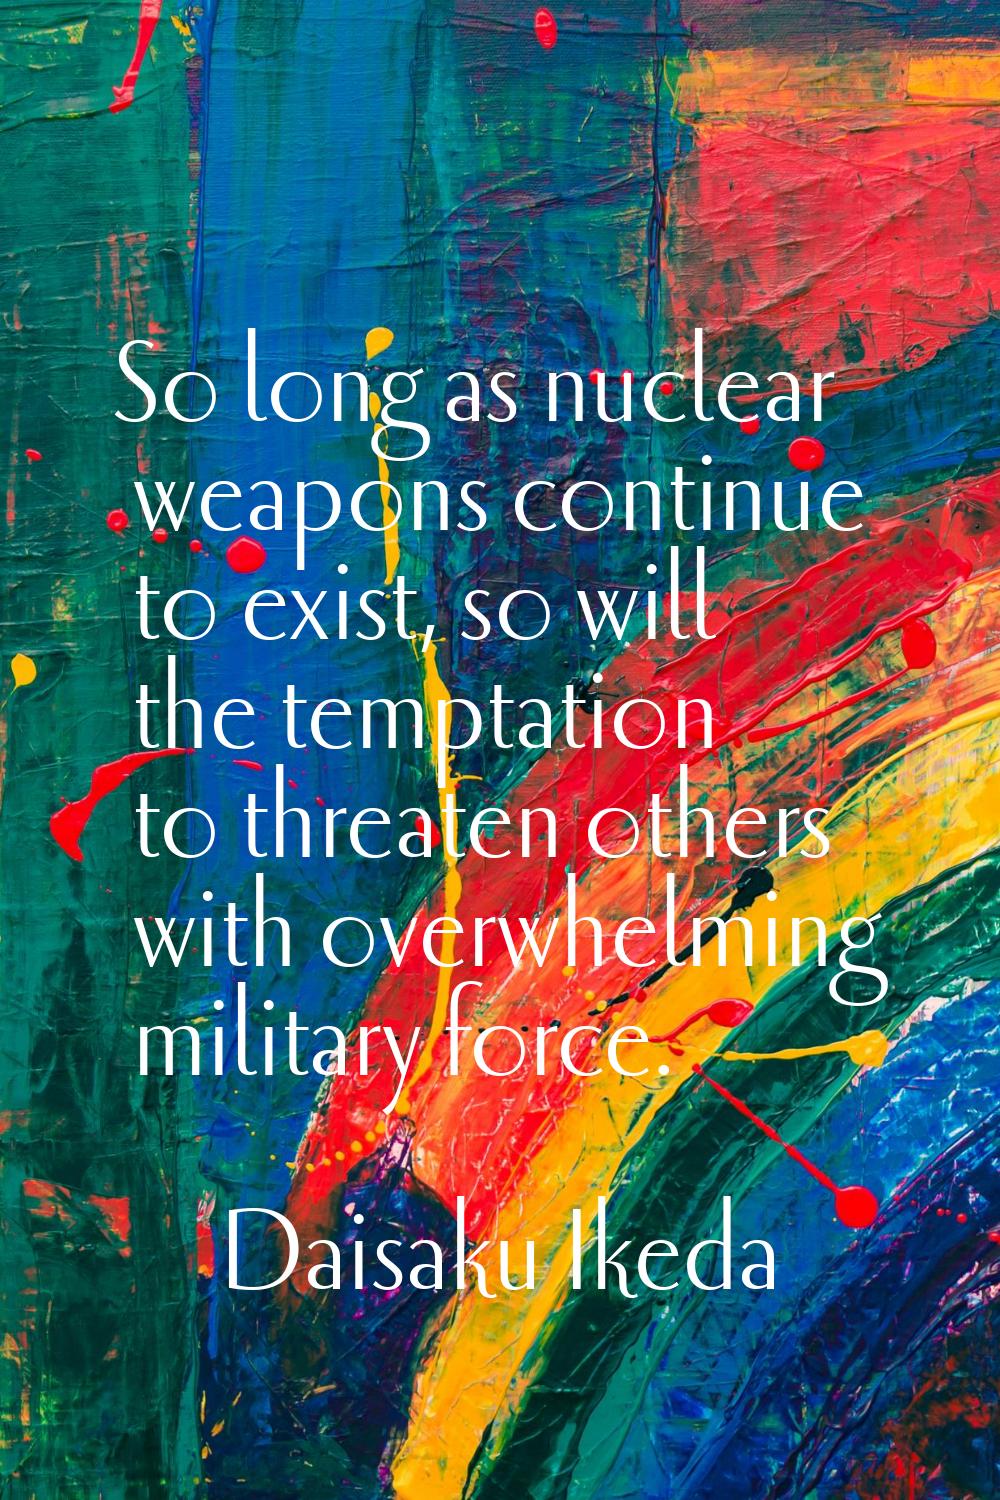 So long as nuclear weapons continue to exist, so will the temptation to threaten others with overwh